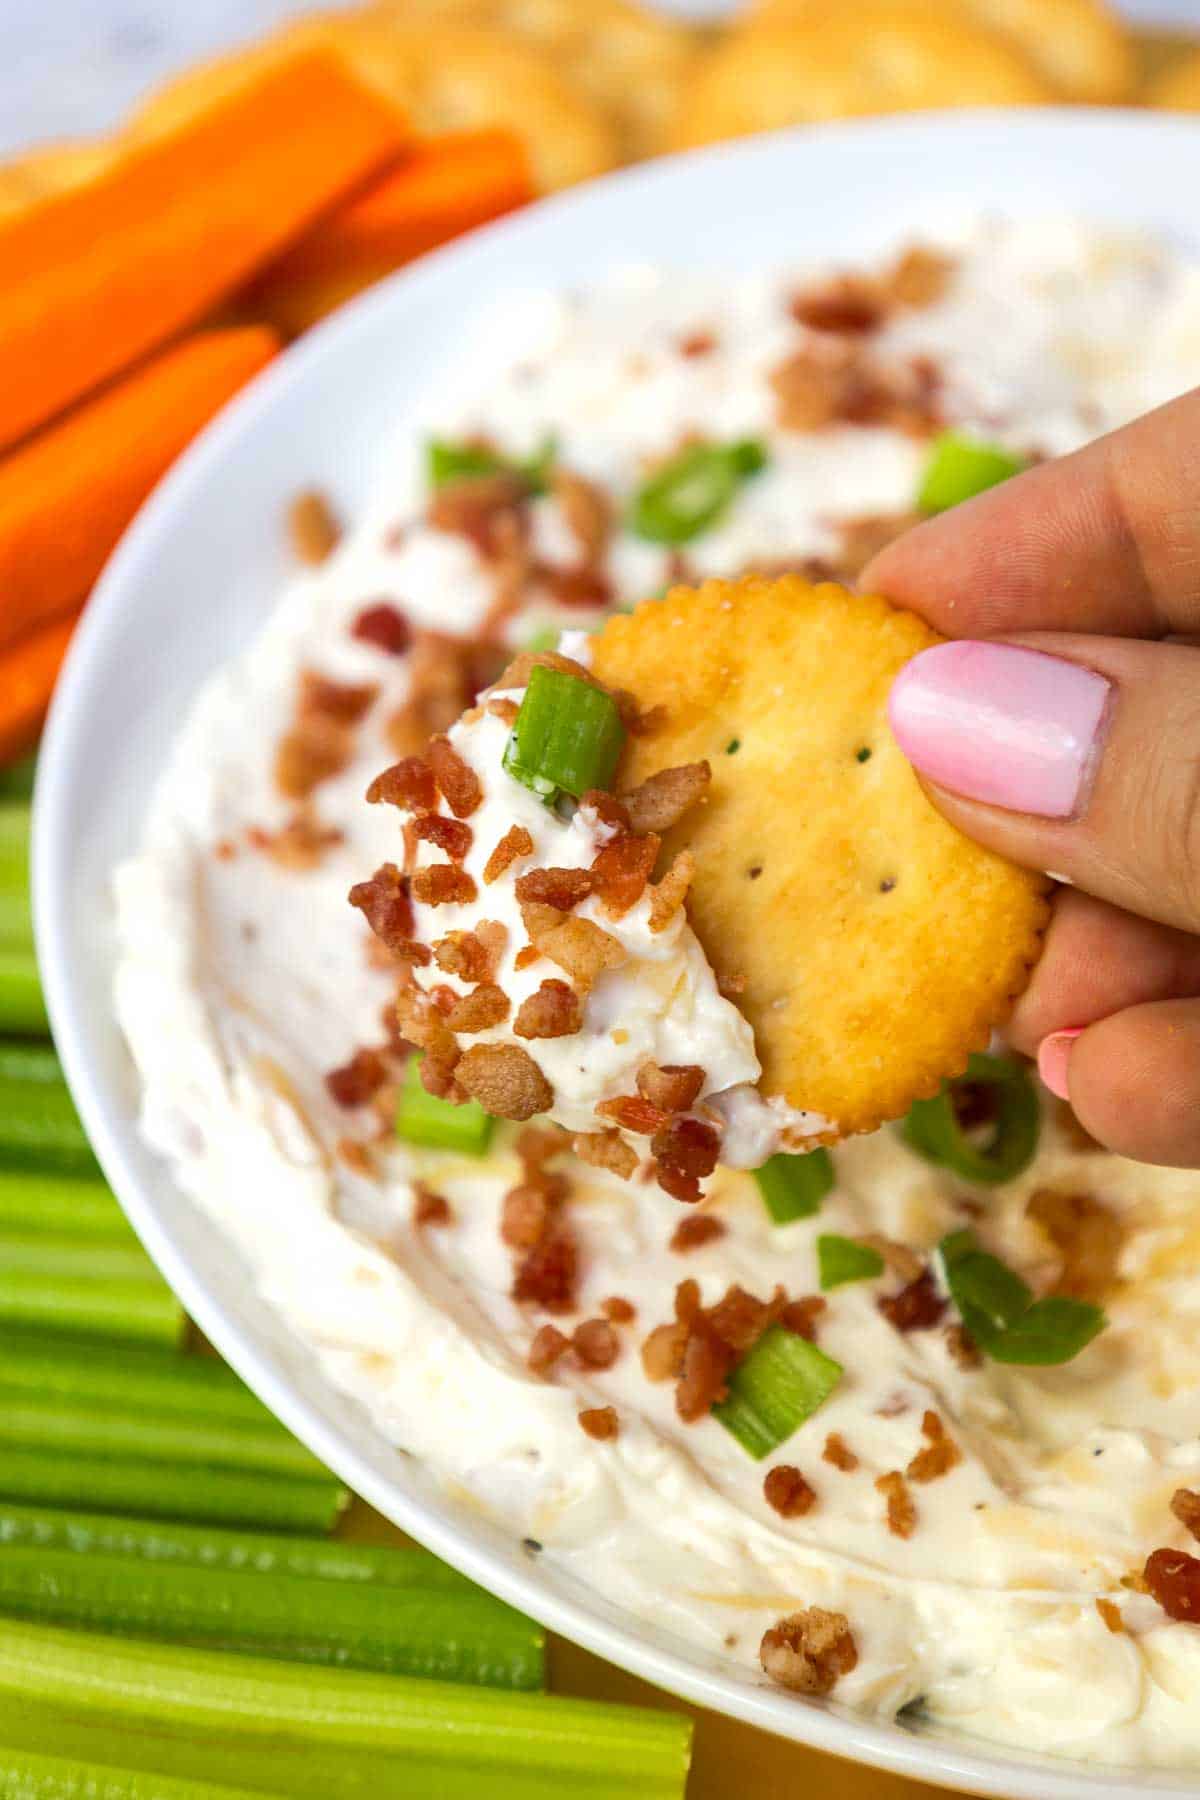 A Ritz cracker is topped with gouda dip.